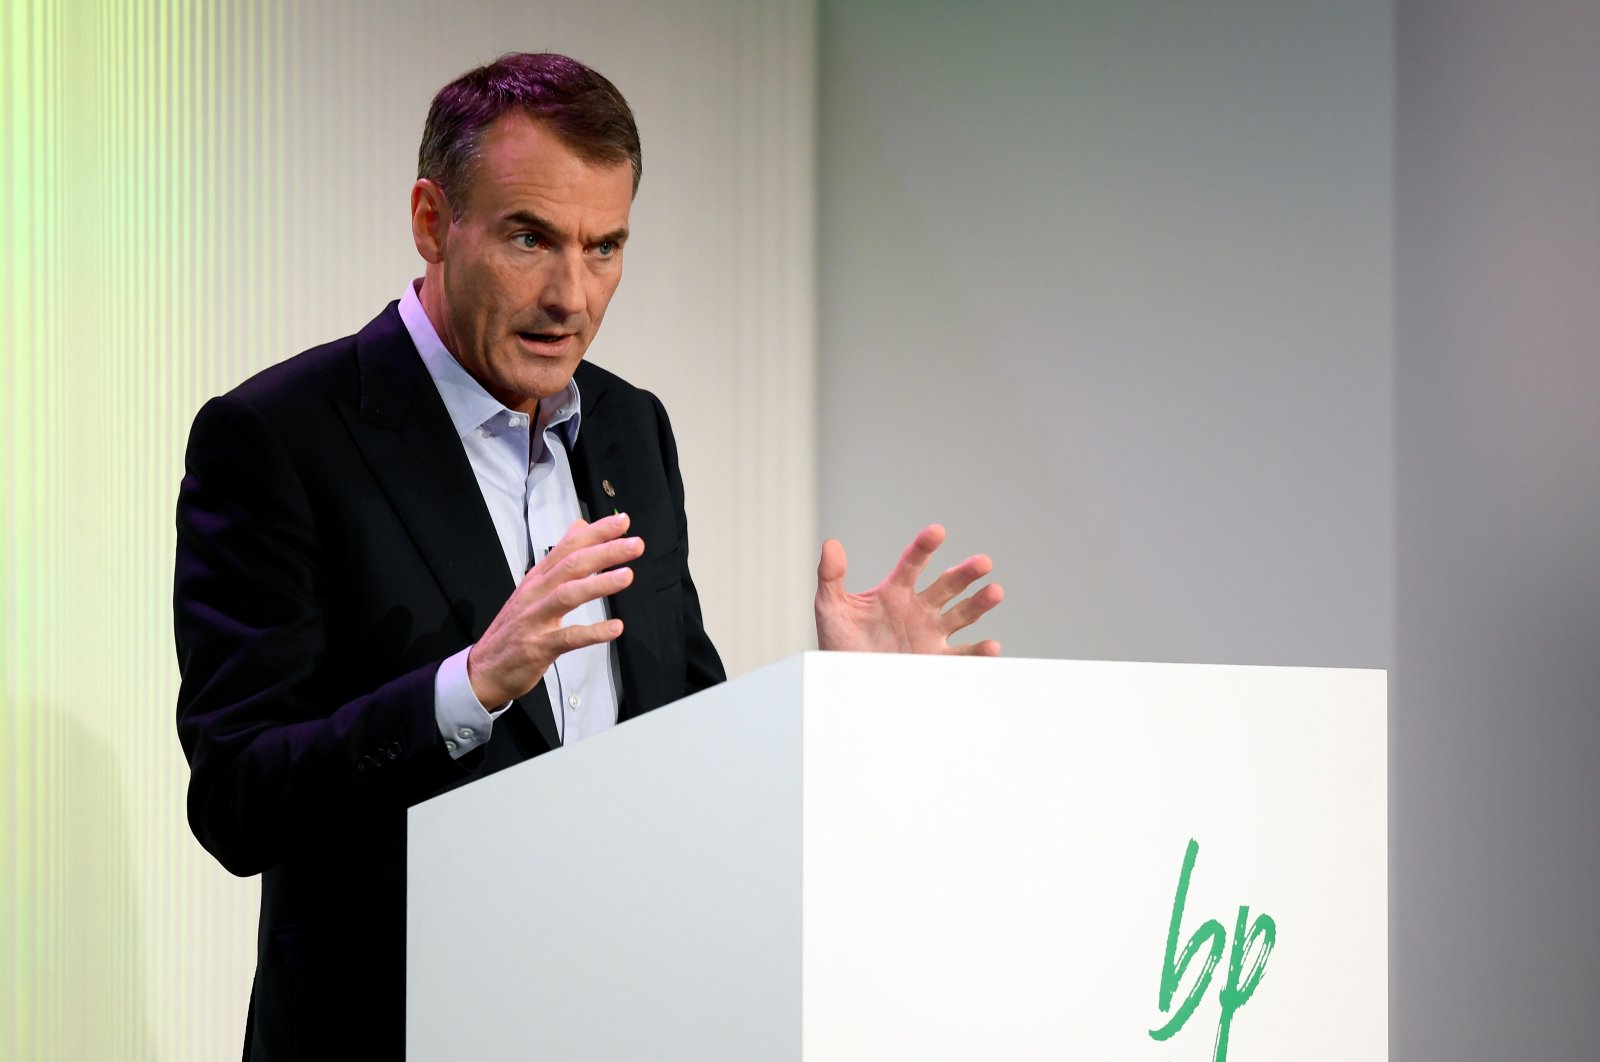 BP's Chief Executive Bernard Looney gives a speech in central London, Britain, Feb. 12, 2020. (Reuters)